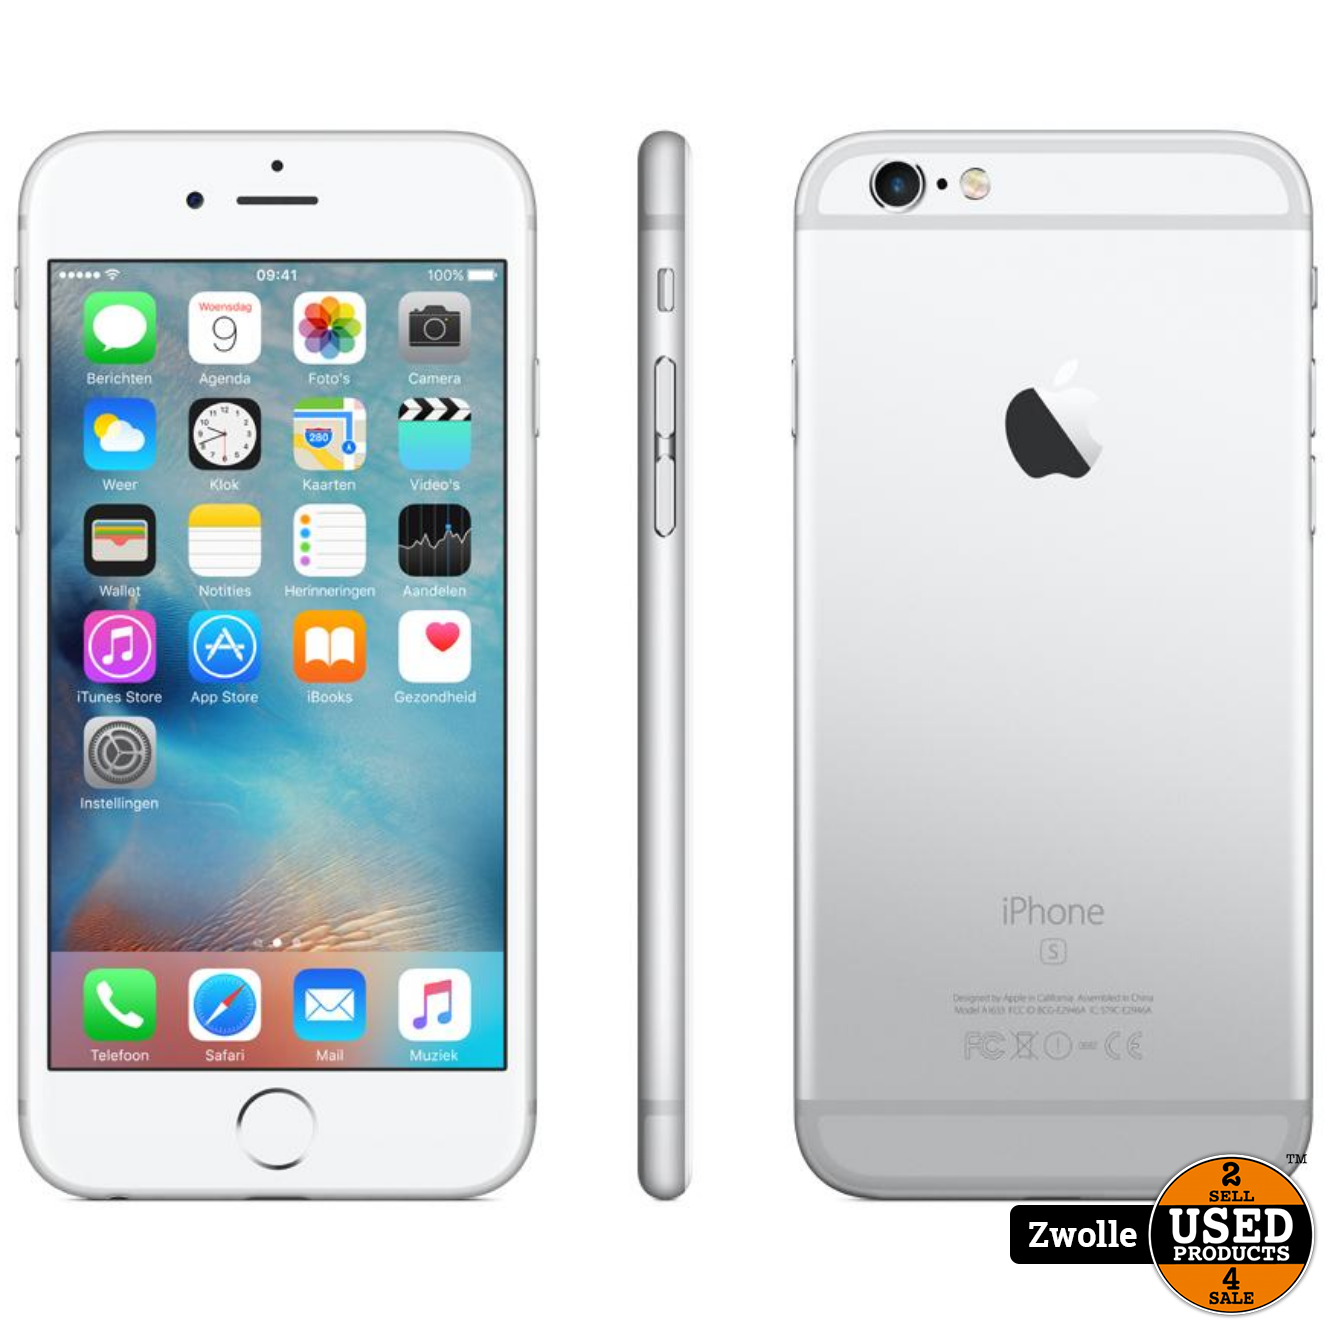 Iphone Iphone 6s Wit 16 Gb 80 Used Products Zwolle